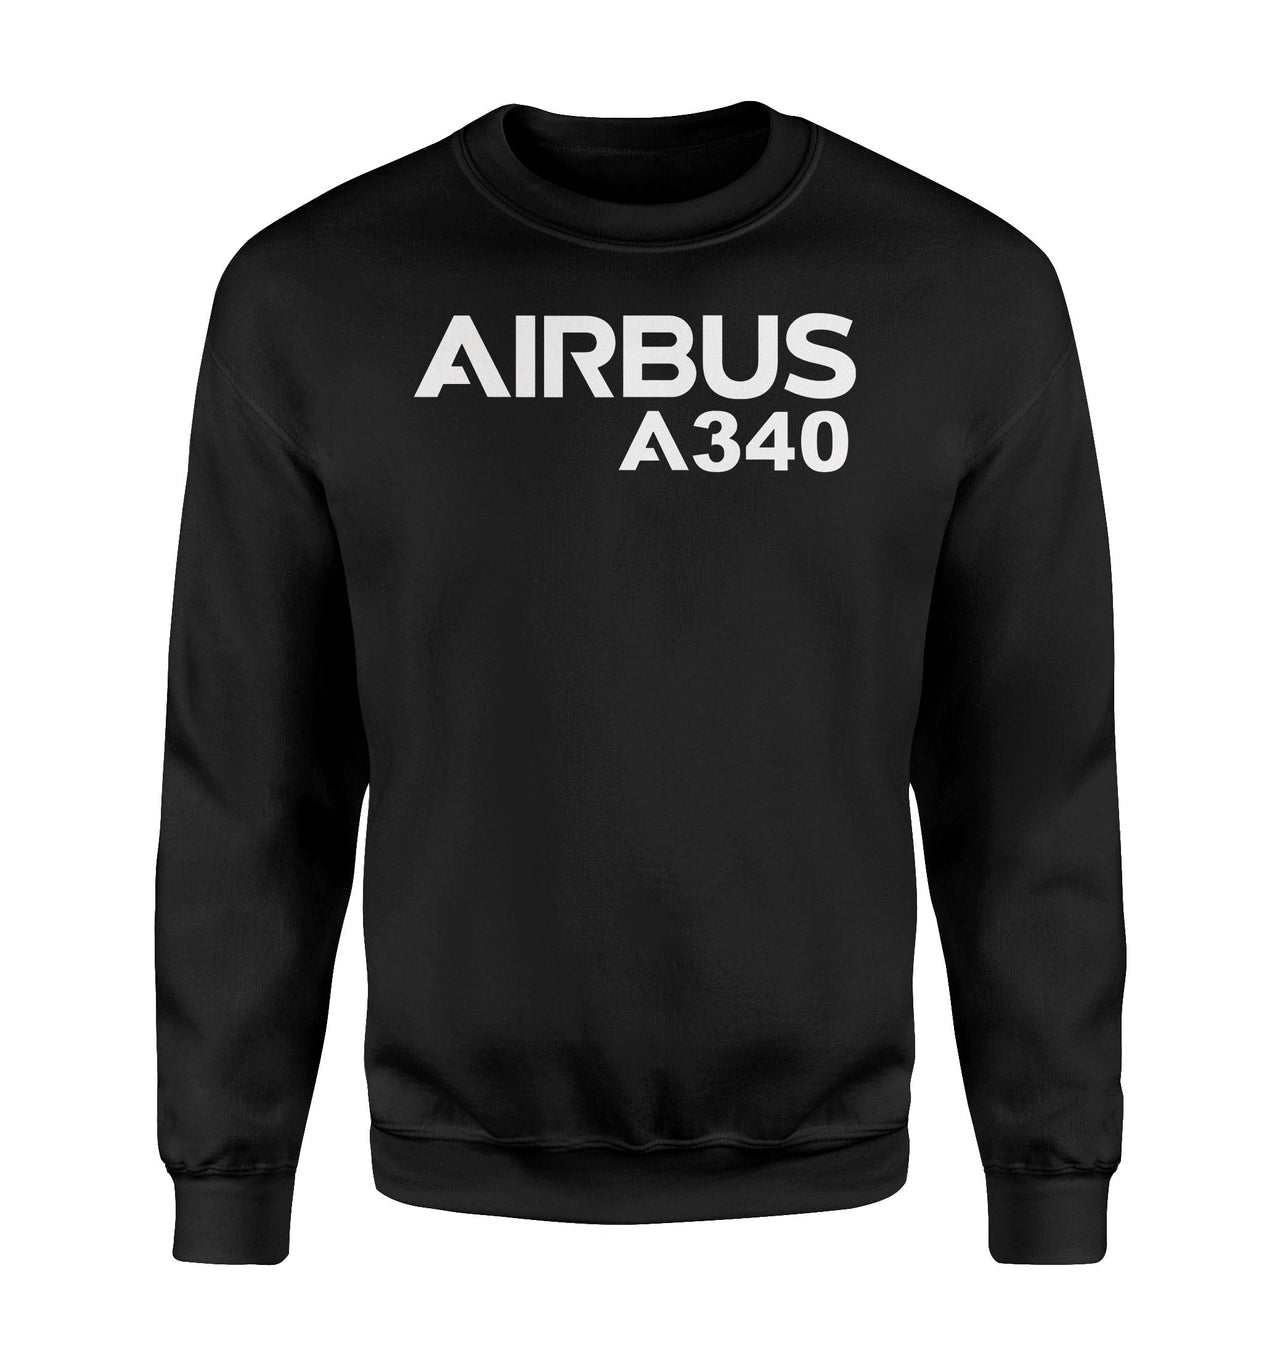 Airbus A340 & Text Designed Sweatshirts